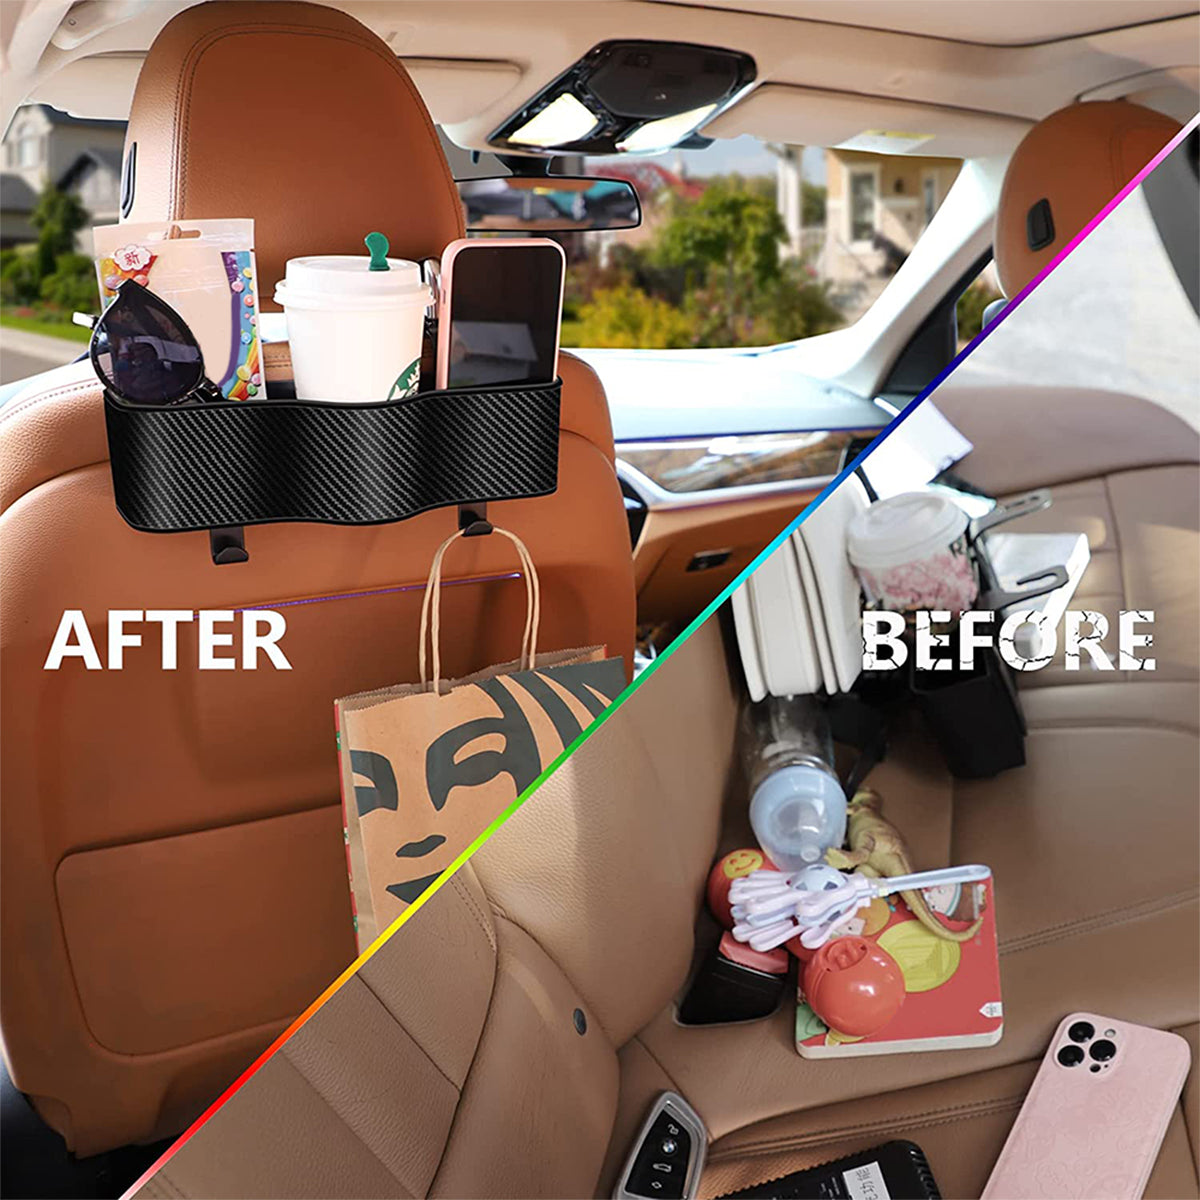 Car Headrest Backseat Organizer with Cup Holders, Custom-Fit For Car, Seat Back Organizer Perfect for Eating in Your Car, Back Seat Organizer for Kids DLFD242